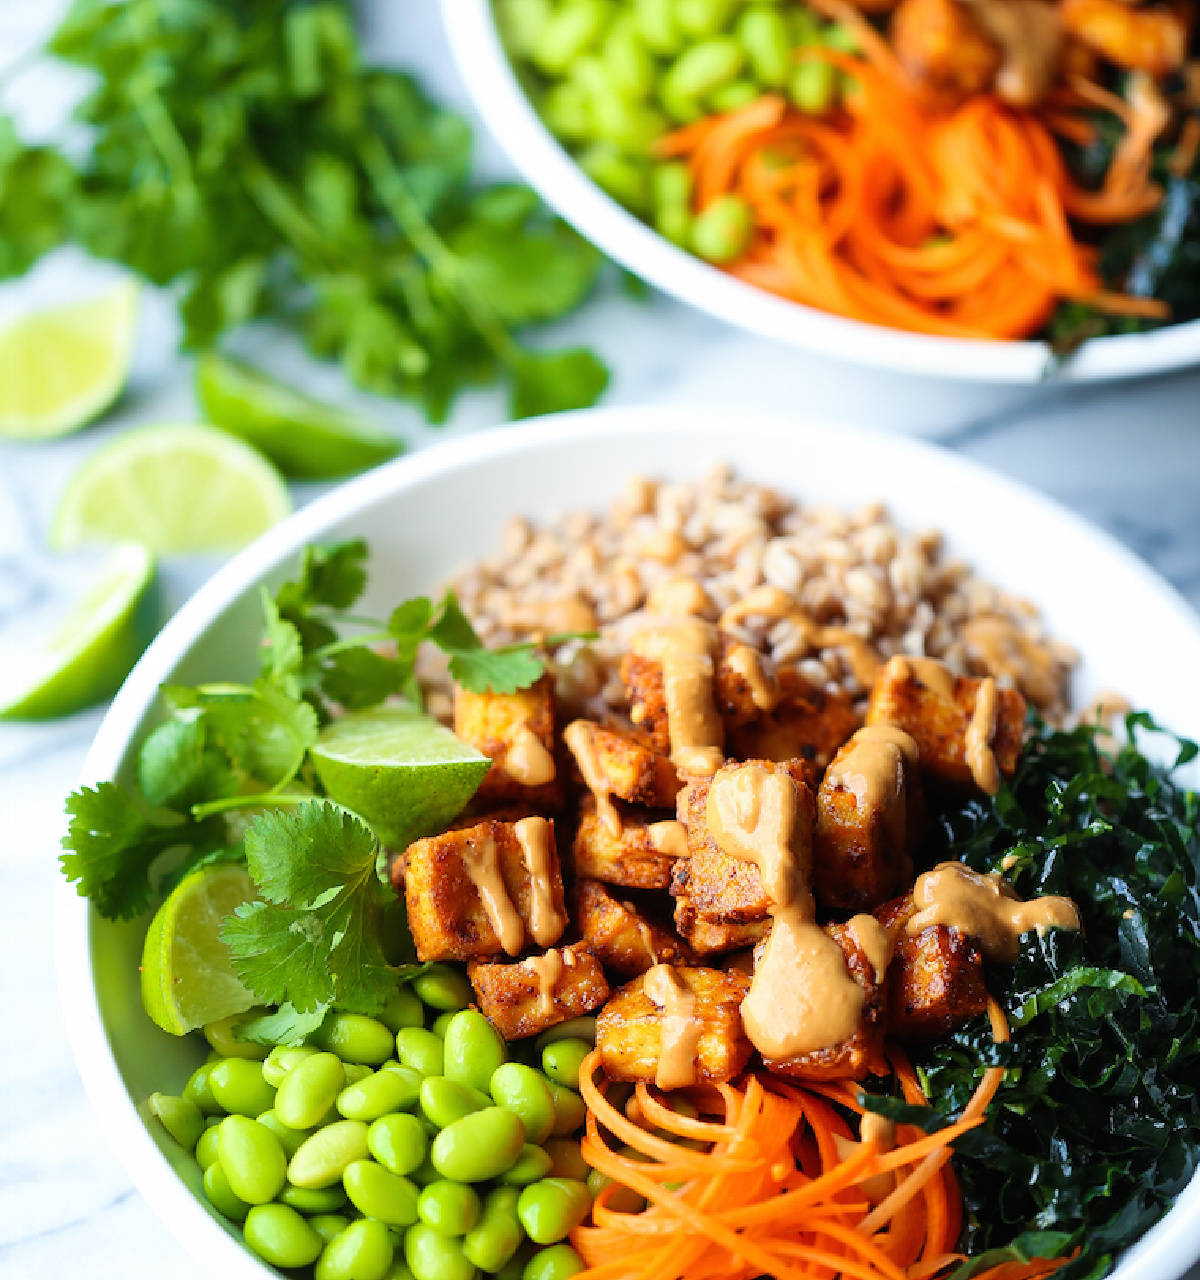 7 Super Delicious Tofu Recipes That Are Healthy and Easy - It's A Zesty ...